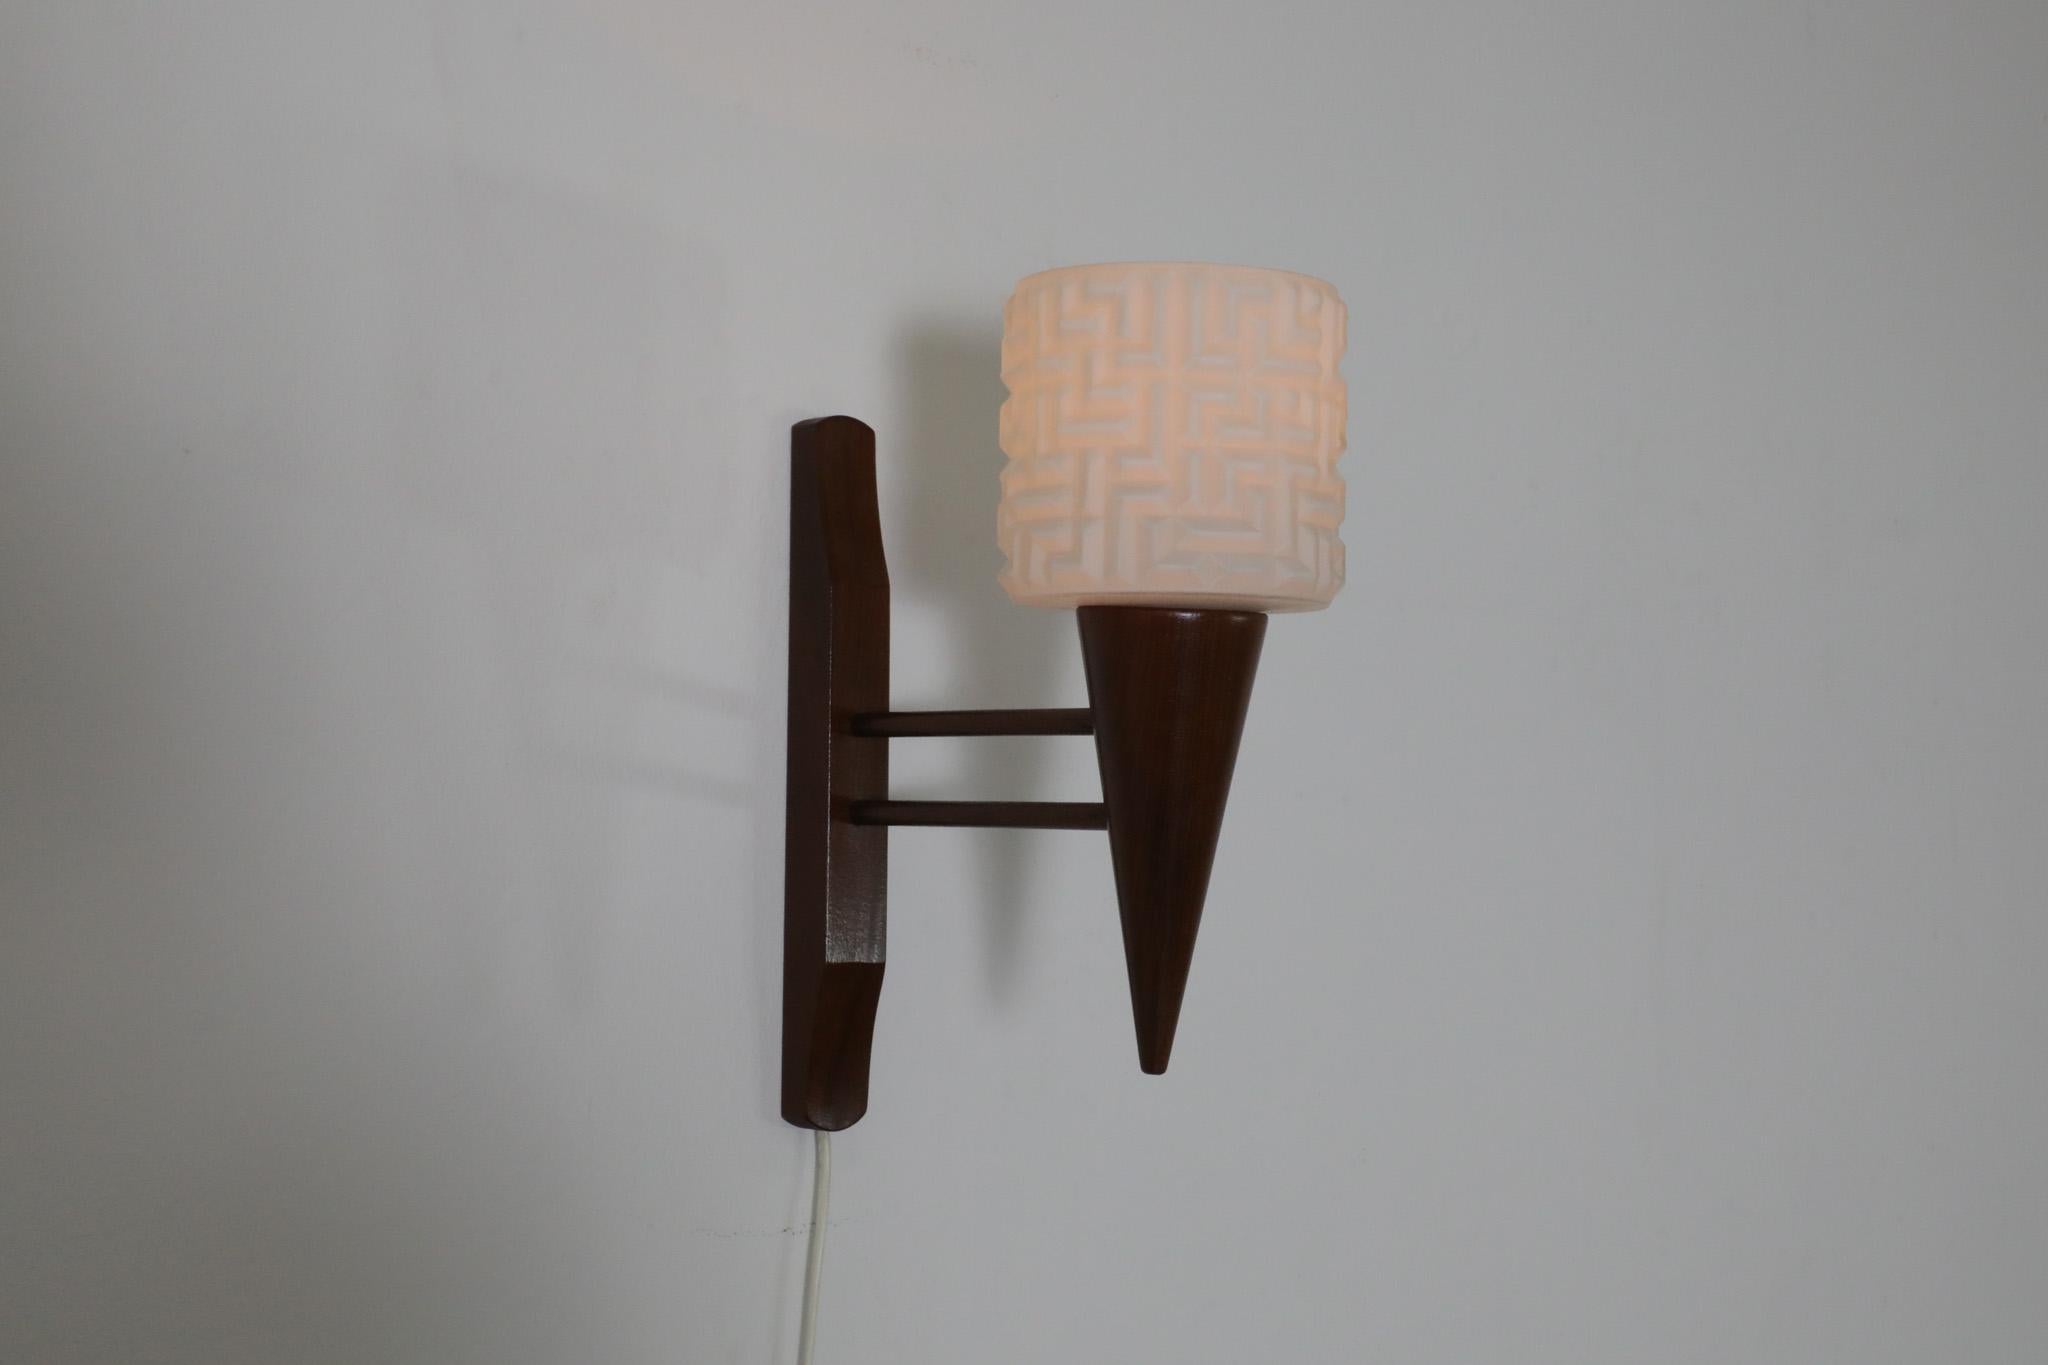 Teak Wall Mount Sconce with Pressed Glass Shade In Good Condition For Sale In Los Angeles, CA